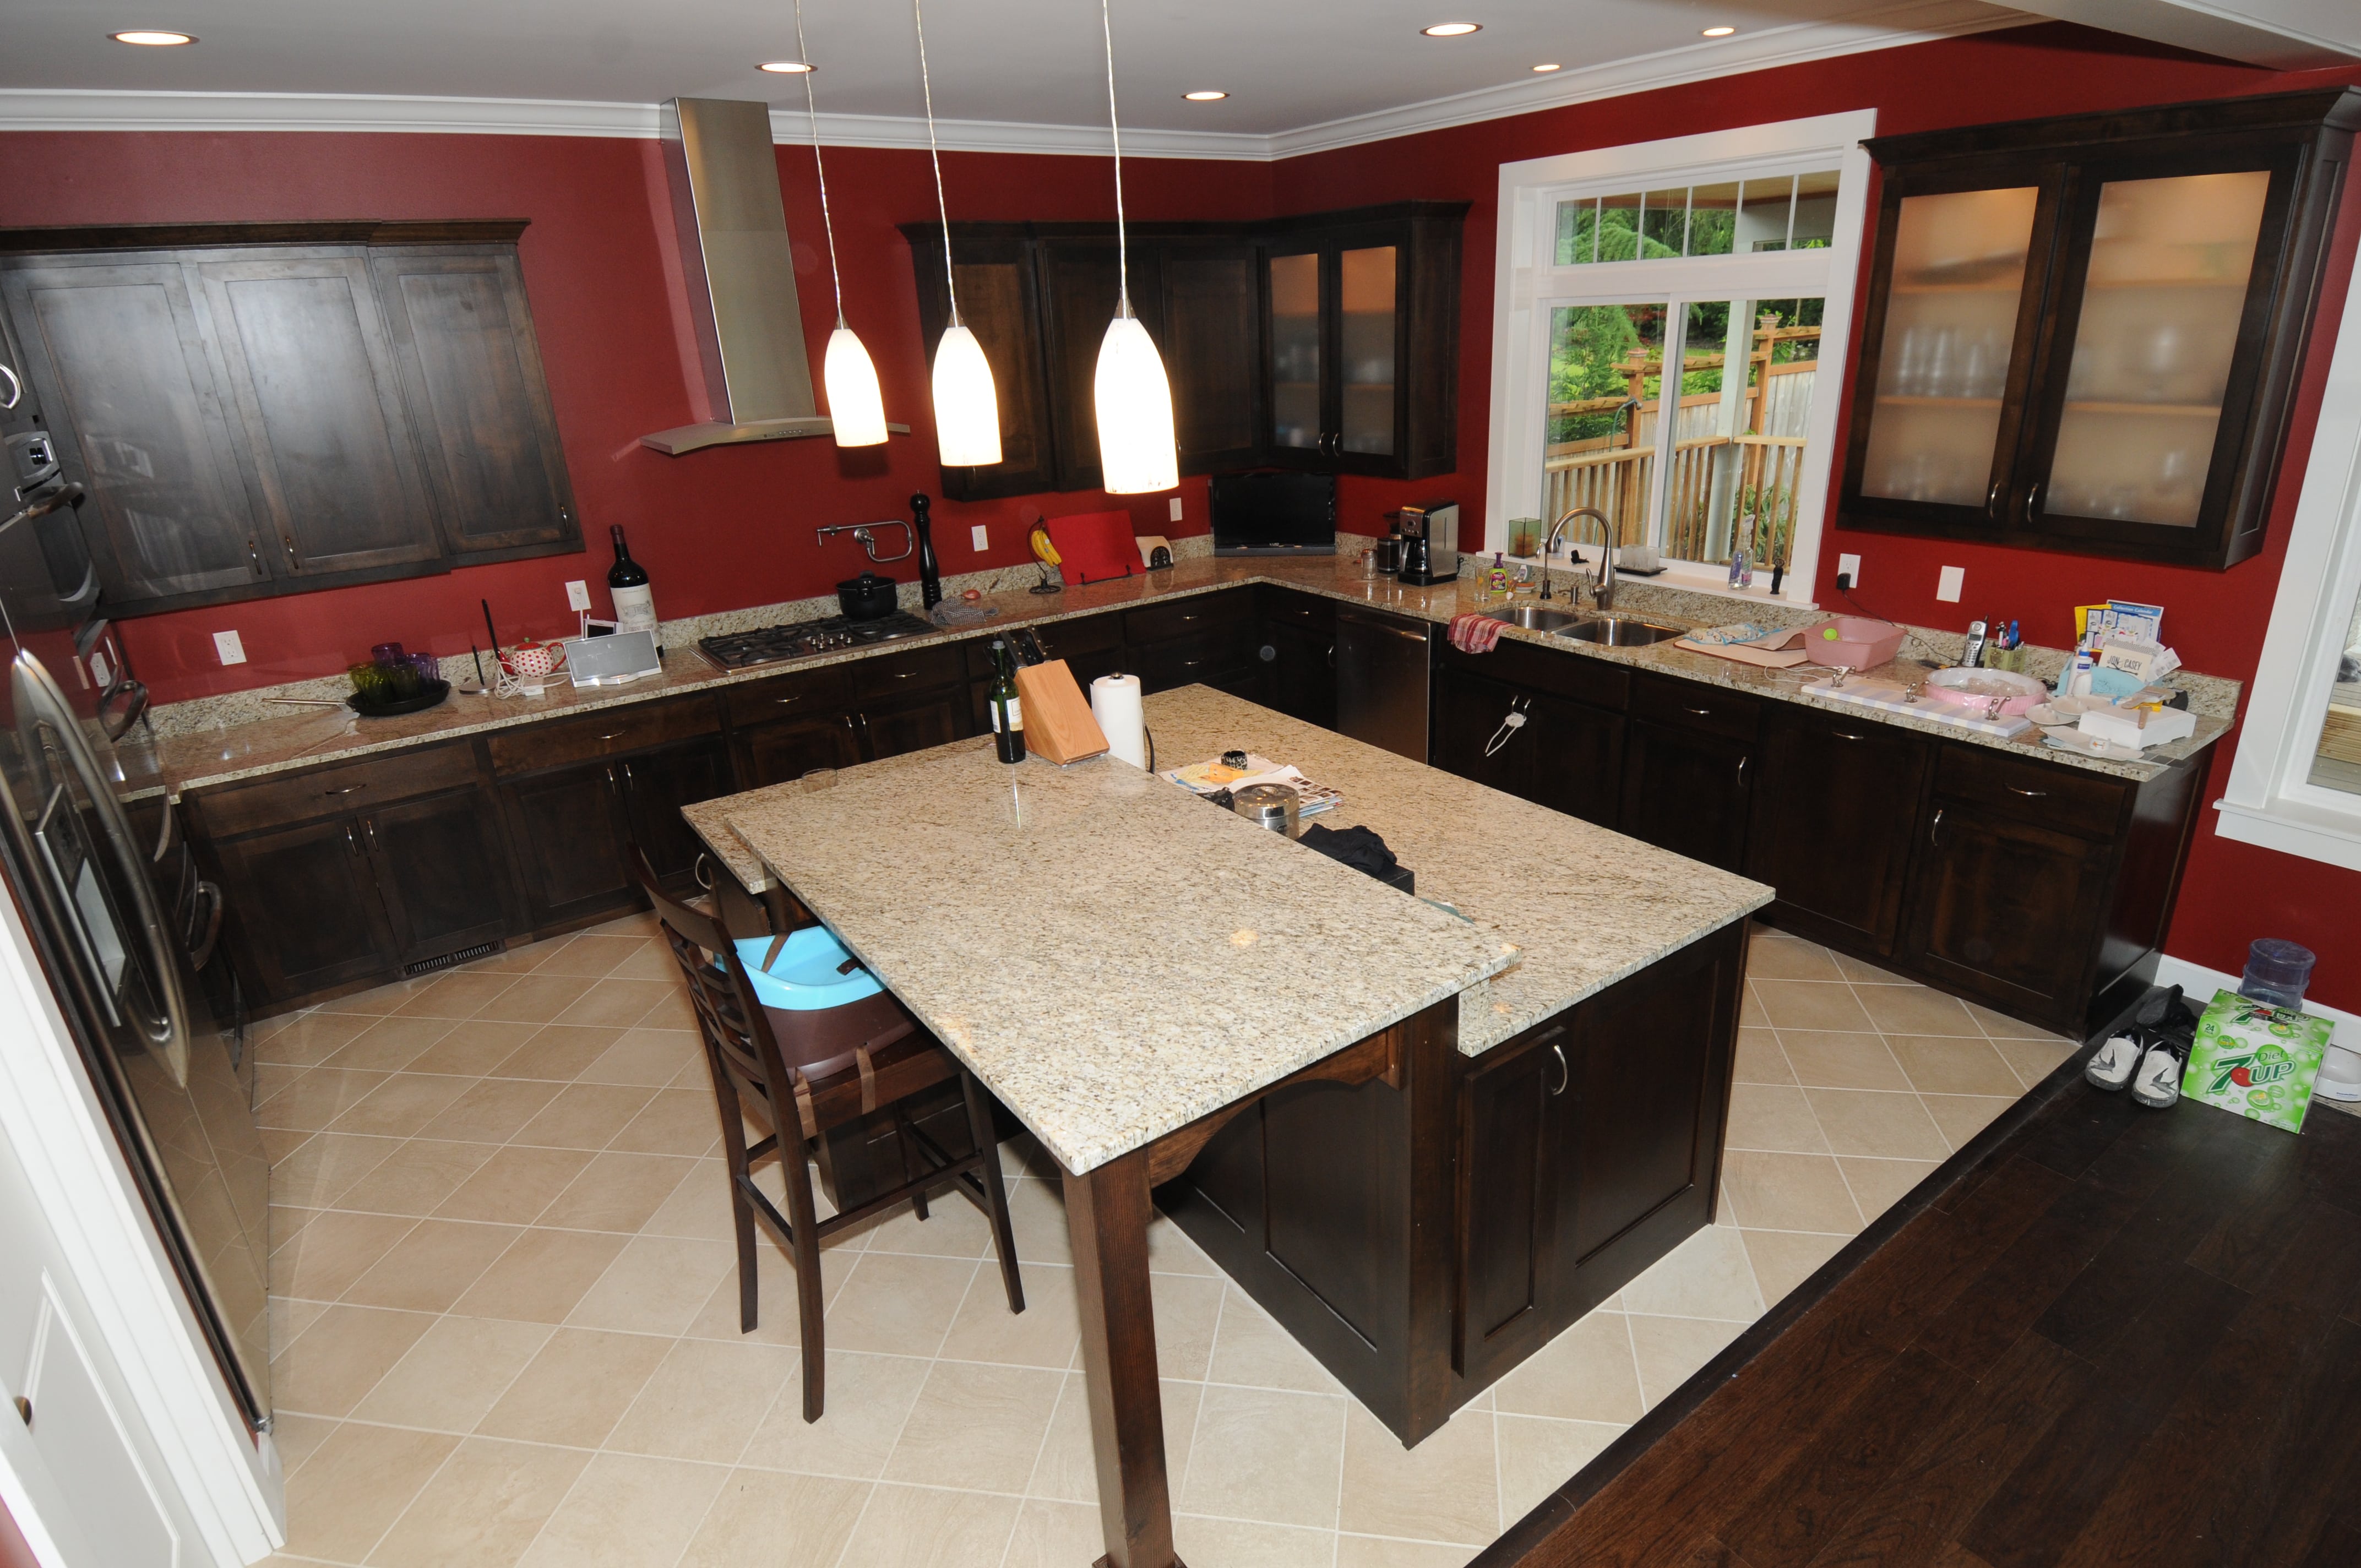 kitchen at the newly remodeled Mavis residence